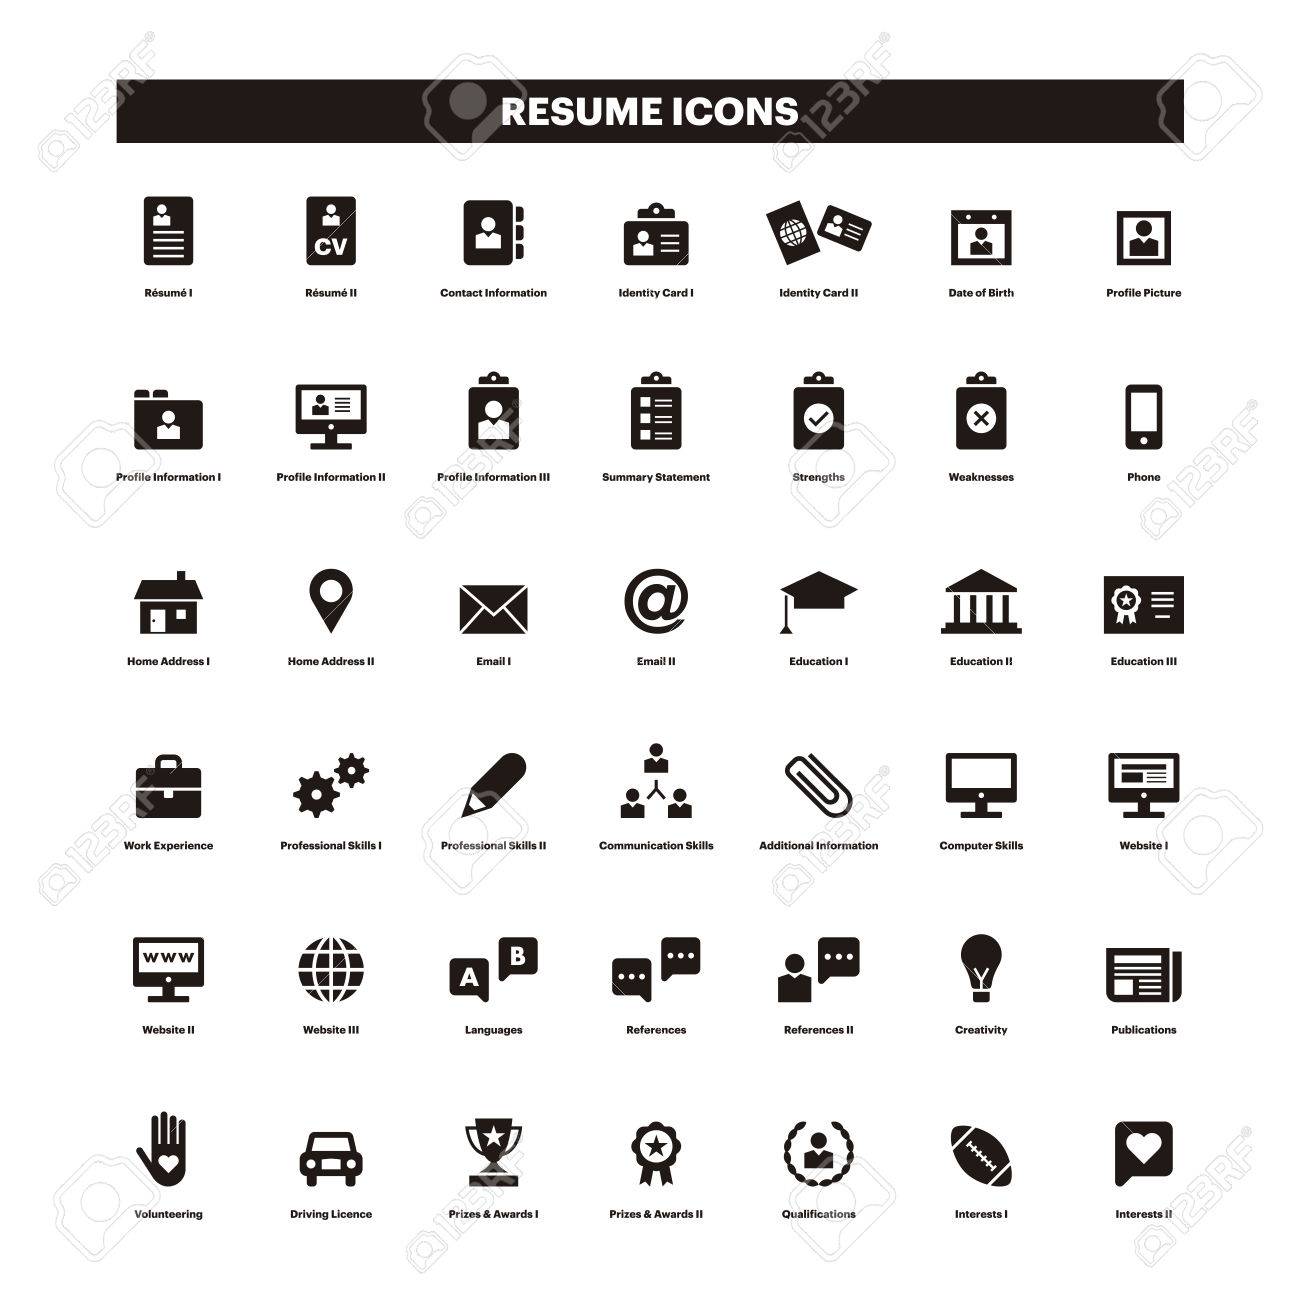 resume-icon-vector-49639-free-icons-library